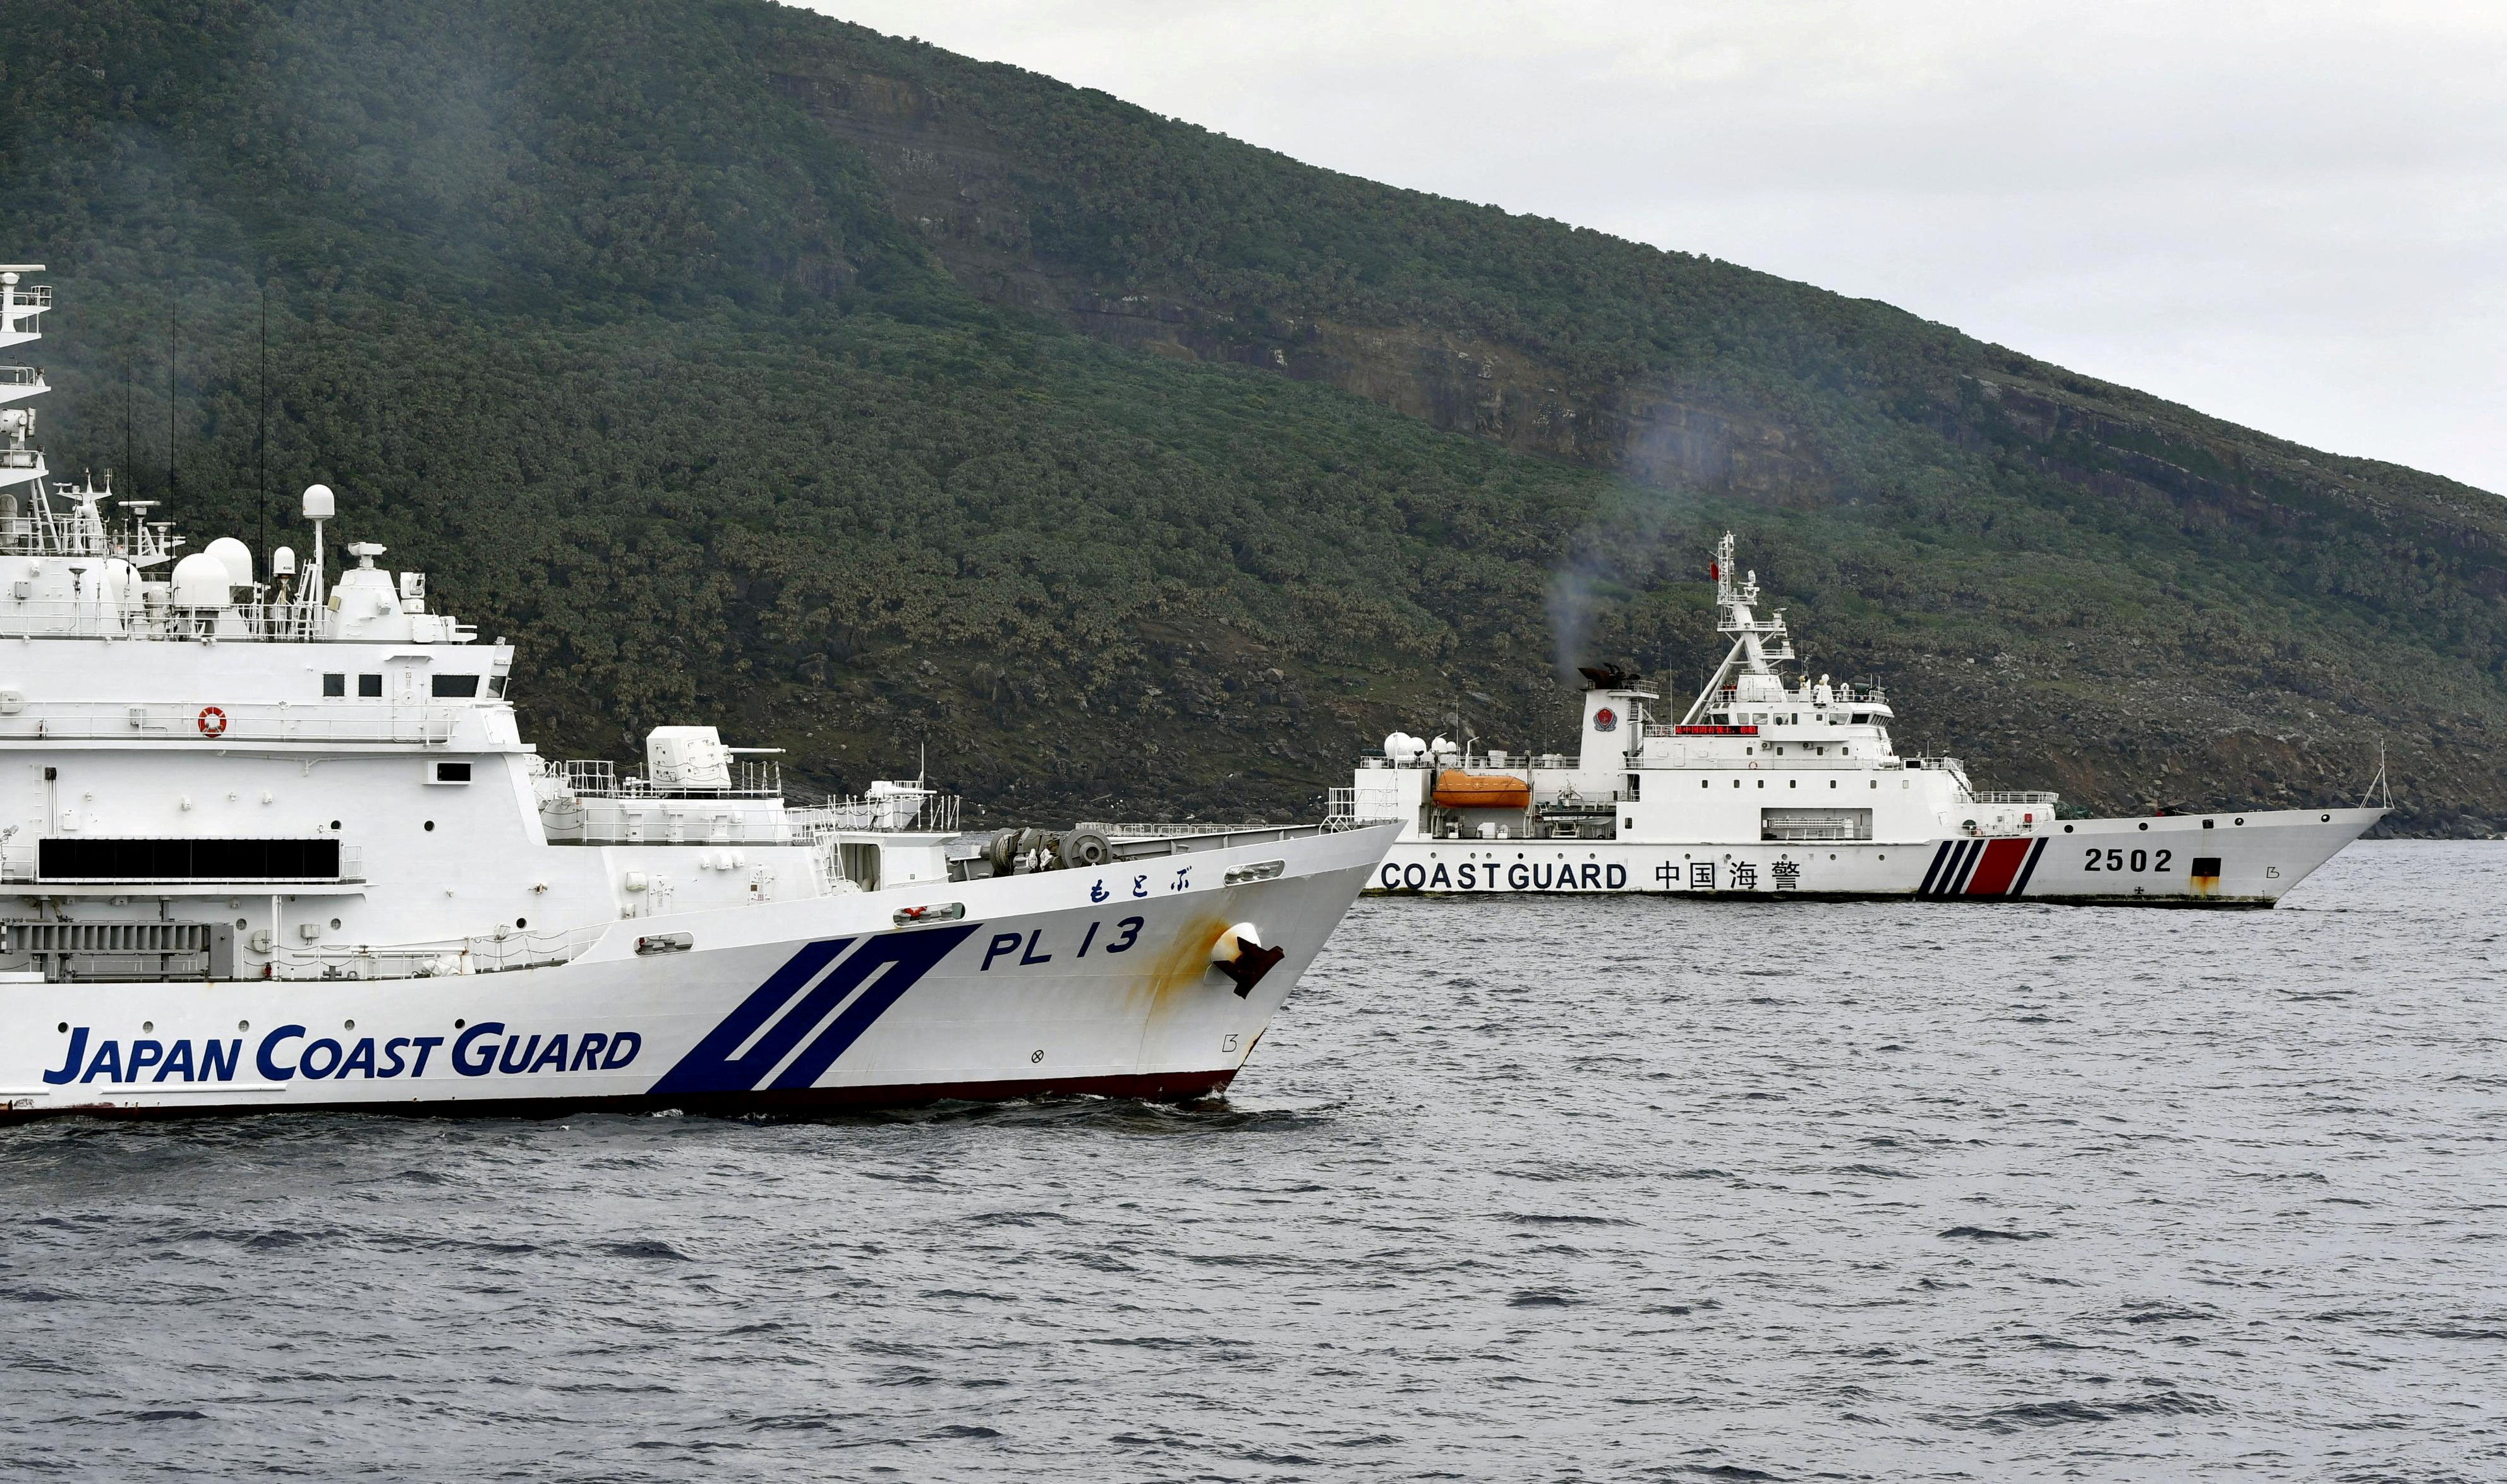 A China Coast Guard vessel sails near a Japan Coast Guard vessel off Uotsuri Island, one of a group of disputed islands called Senkaku Islands in Japan, also known in China as Diaoyu Islands, in the East China Sea on April 27. Photo: Kyodo via Reuters